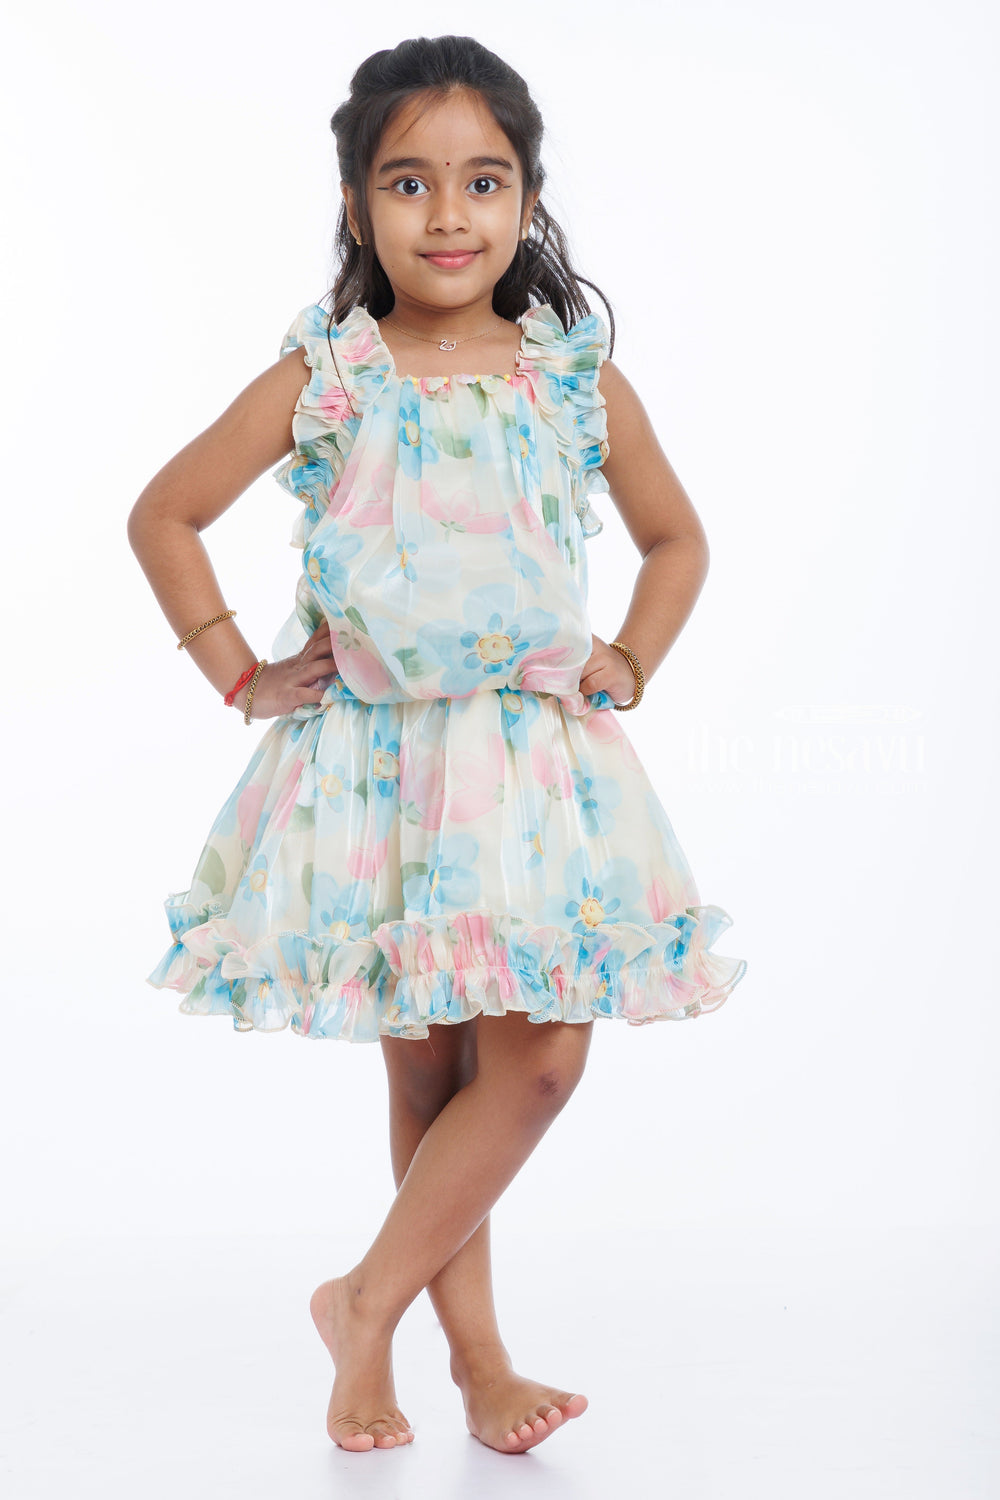 The Nesavu Baby Casual Sets Girls Floral Ruffle Top and Skirt Set in Pastel Tones Nesavu Charming Girls Pastel Floral Ruffle Top and Skirt Set | Playful and Pretty | The Nesavu